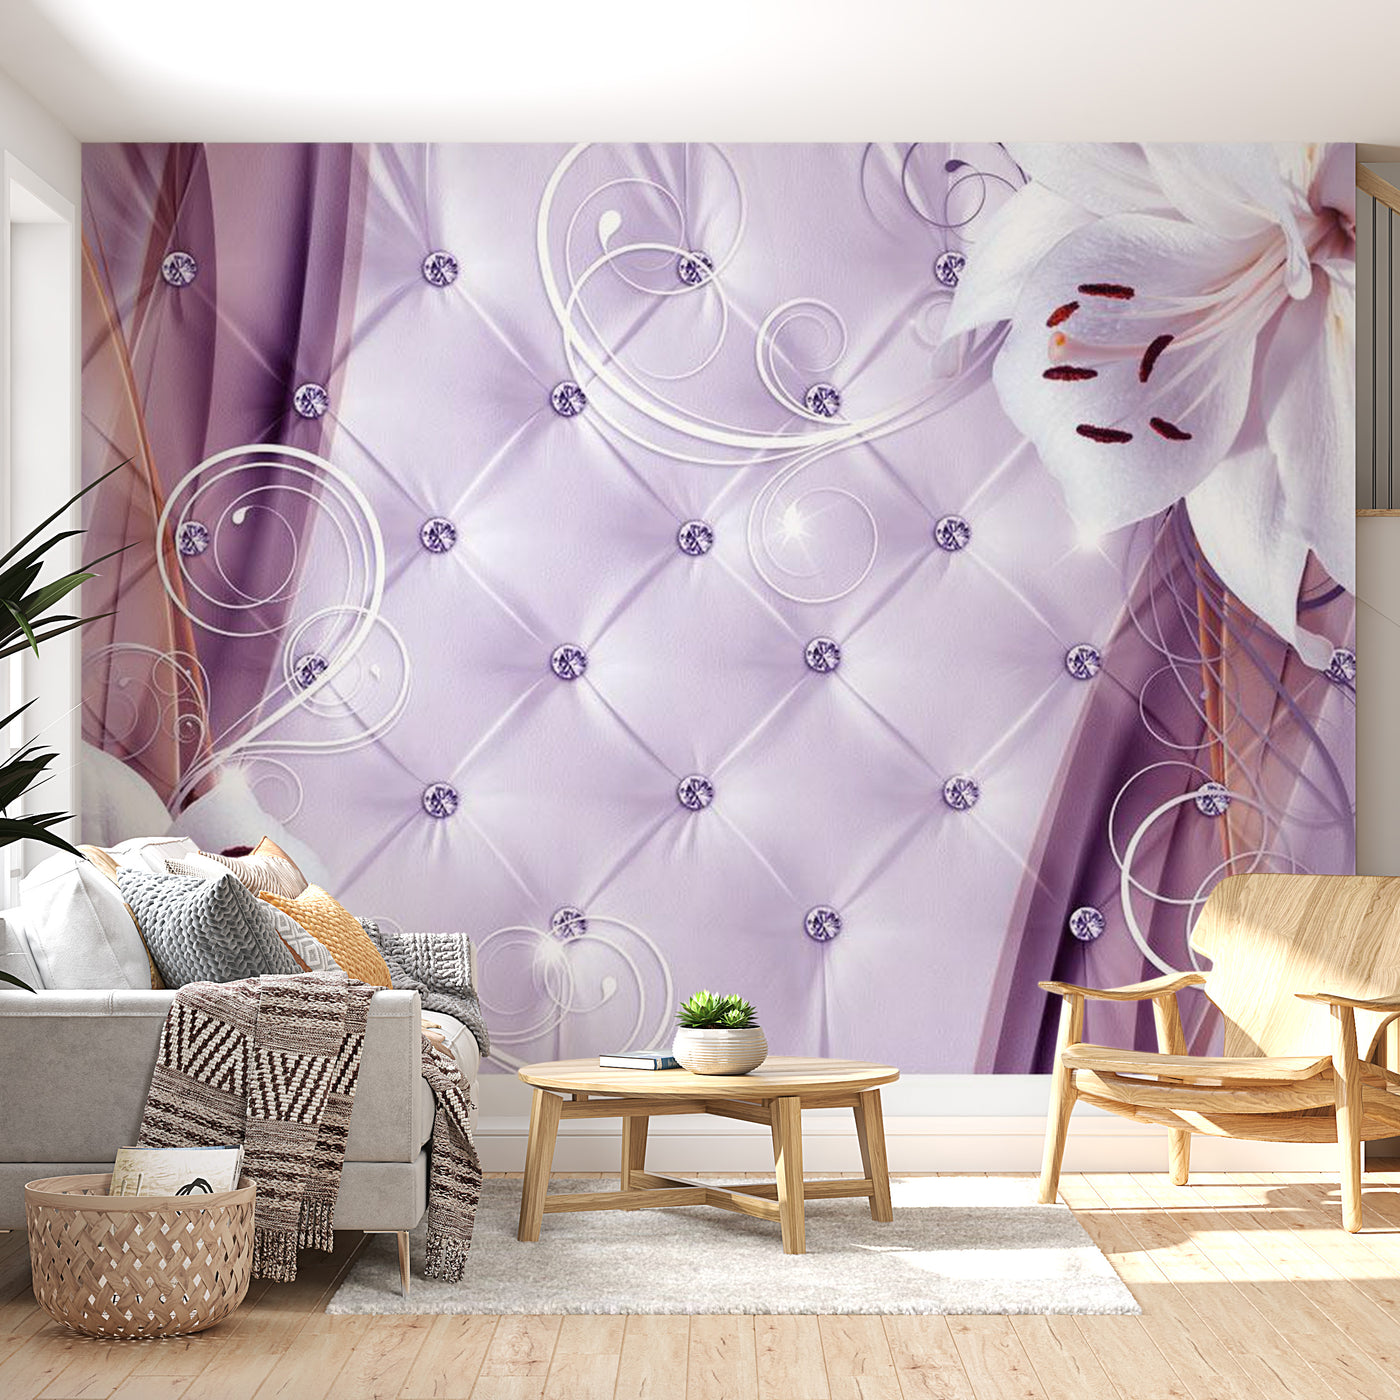 Peel & Stick Floral Wall Mural - Lily And Violet - Removable Wall Decals